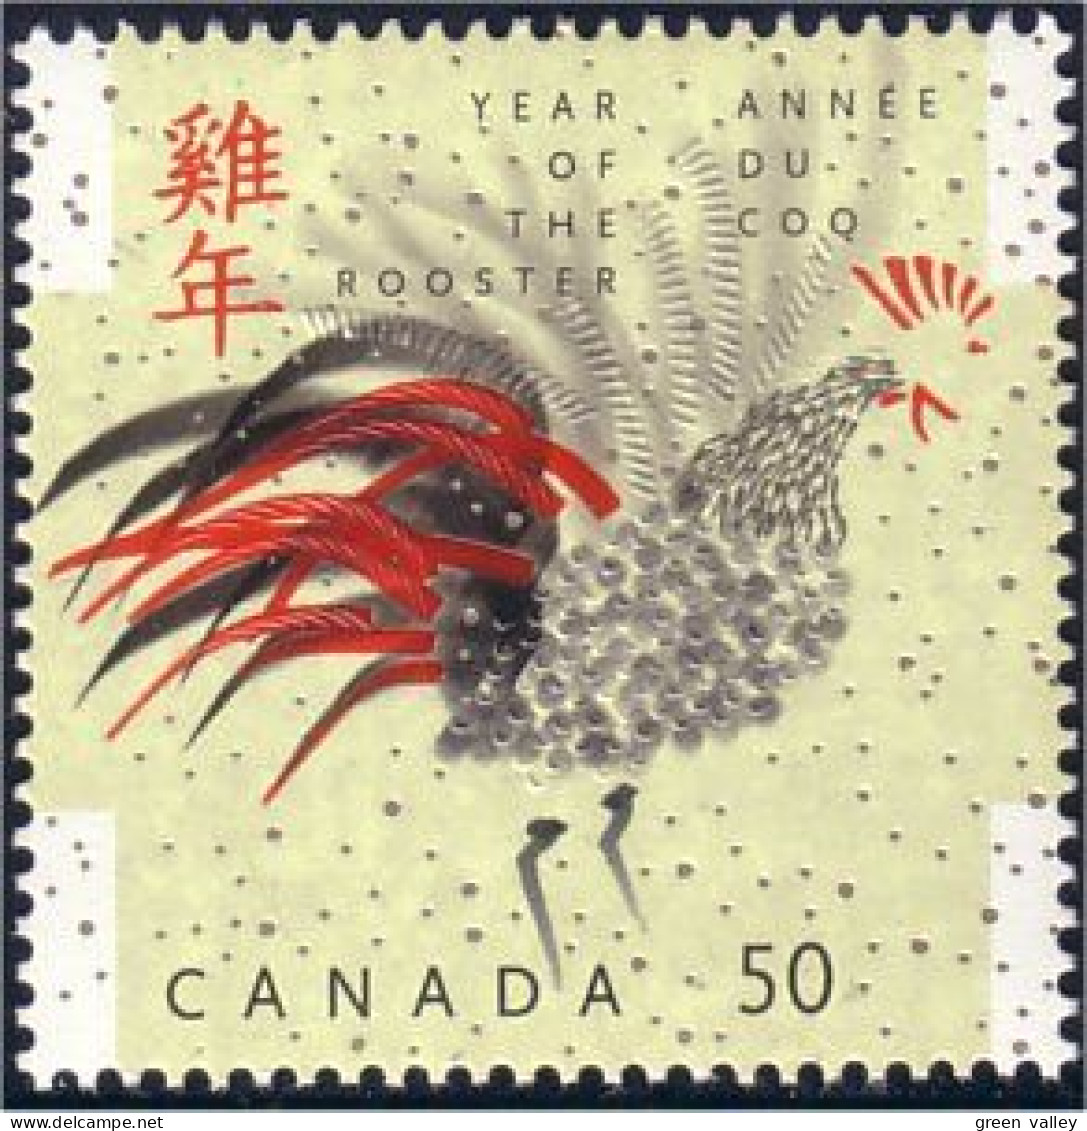 Canada Coq Rooster Huhn MNH ** Neuf SC (C20-83d) - Gallinacées & Faisans